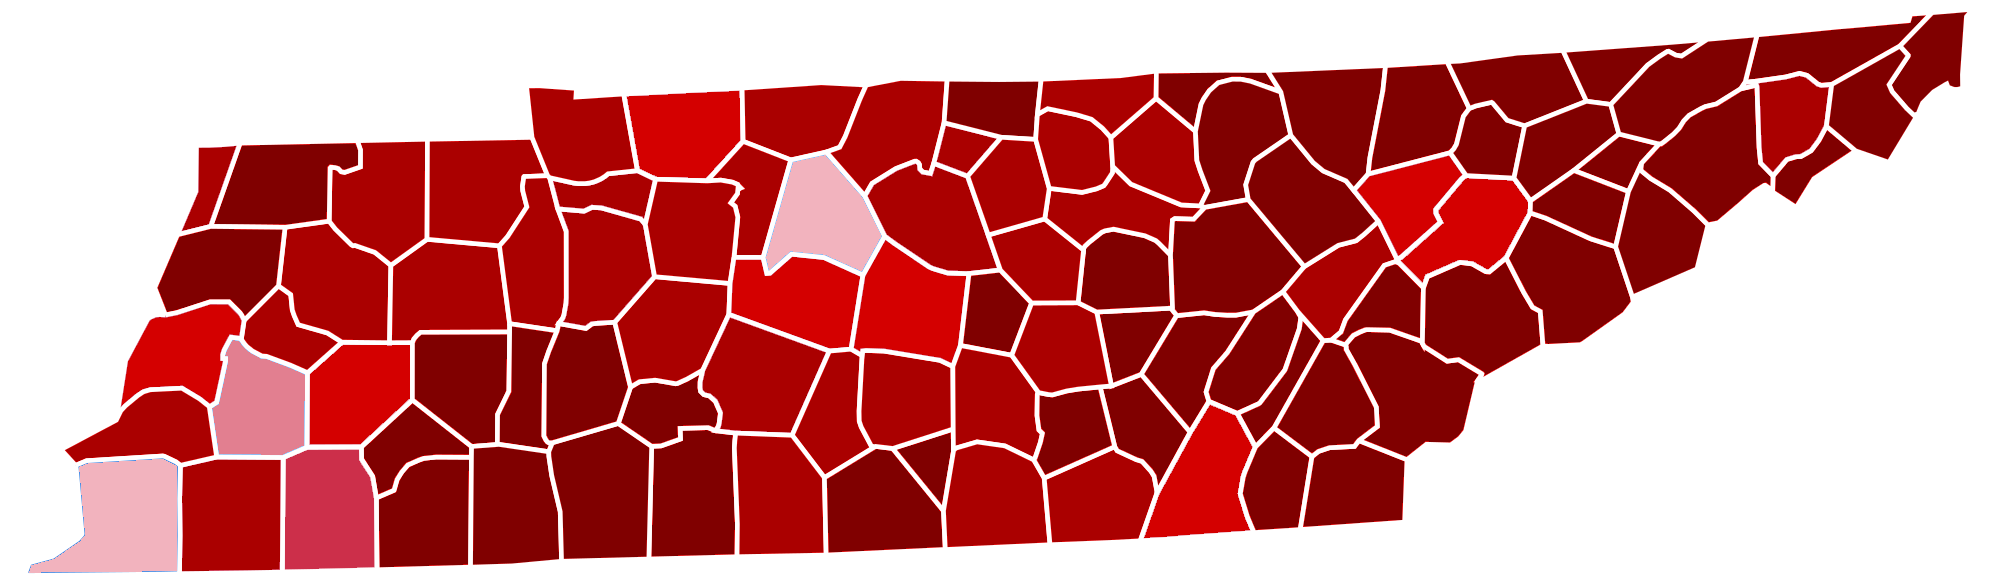 2000px-Tennessee_Presidential_Election_Results_2016_Republican_Landslide_15.06%.png